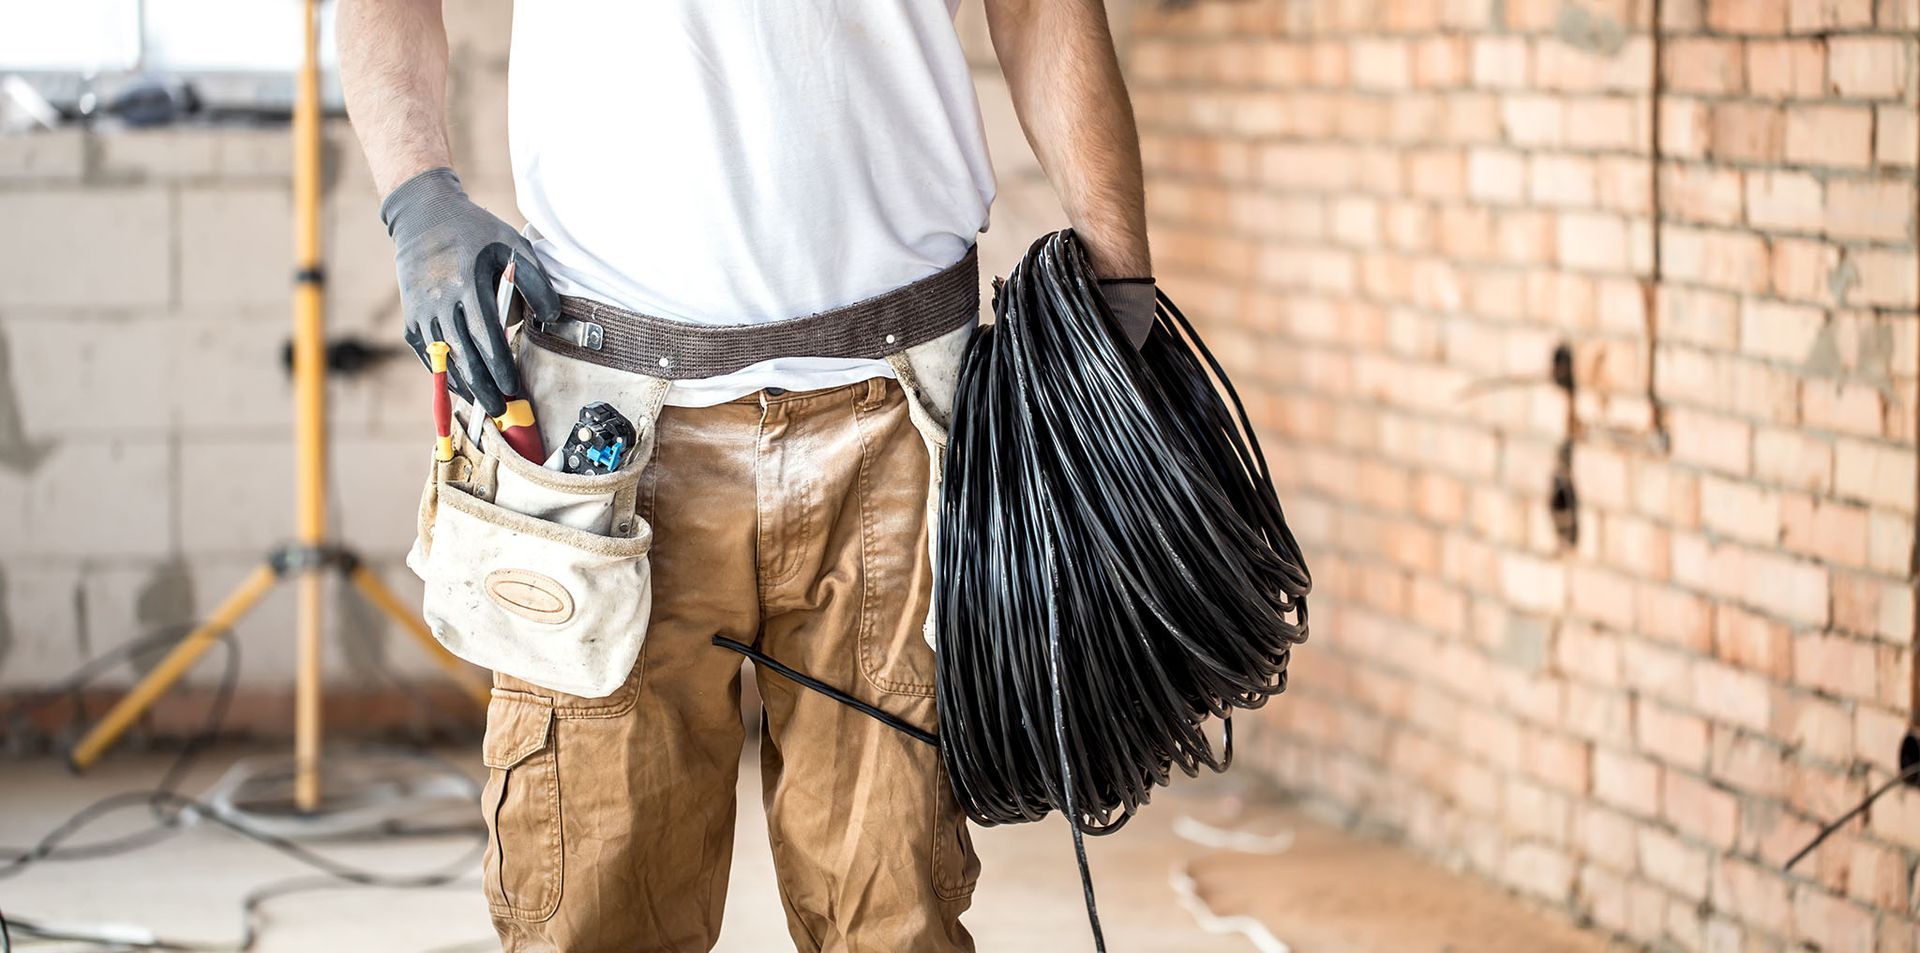 An electrician with tools holding a bunch of wires in his hands